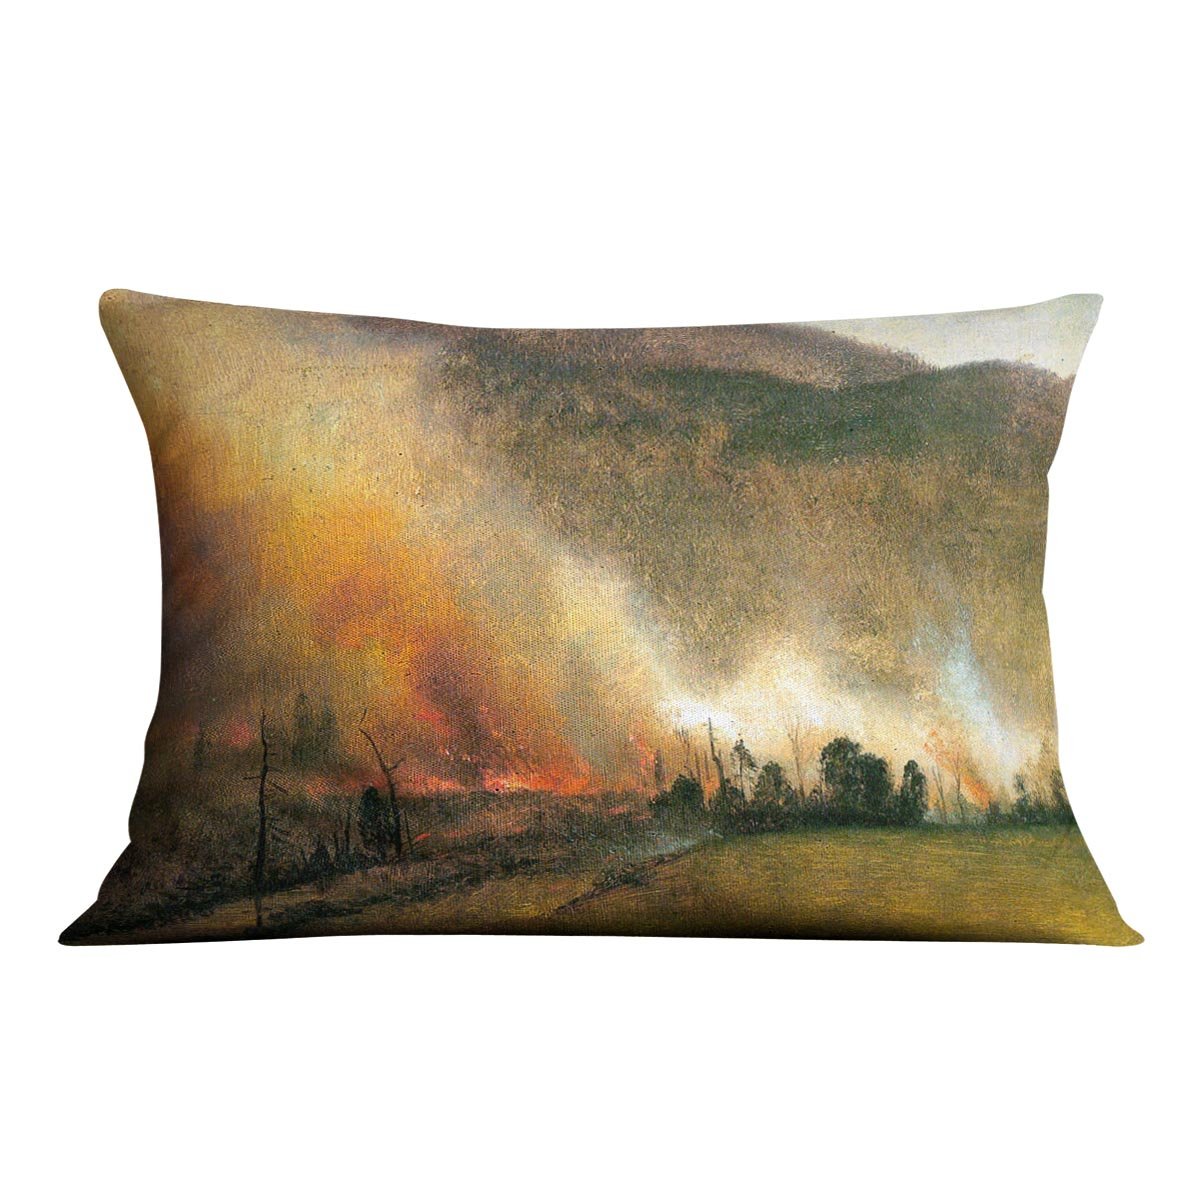 White Mountains New hampshire 1 by Bierstadt Cushion - Canvas Art Rocks - 4